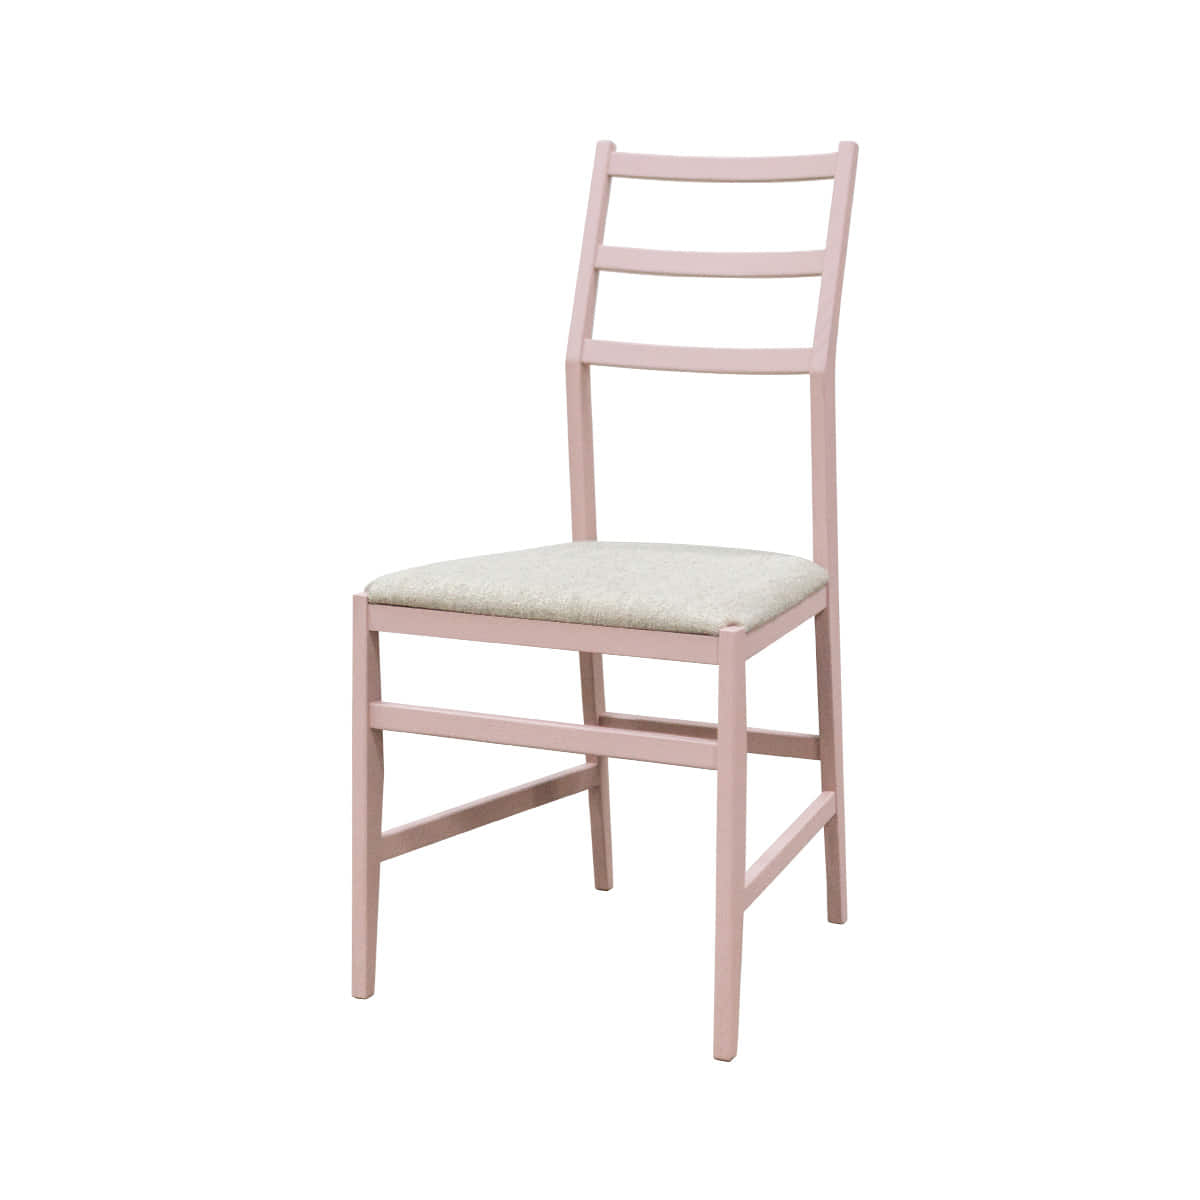 Zacc collection by SEDEC Tito Dining Chair 티토 식탁 의자 - PINK 211 (핑크)